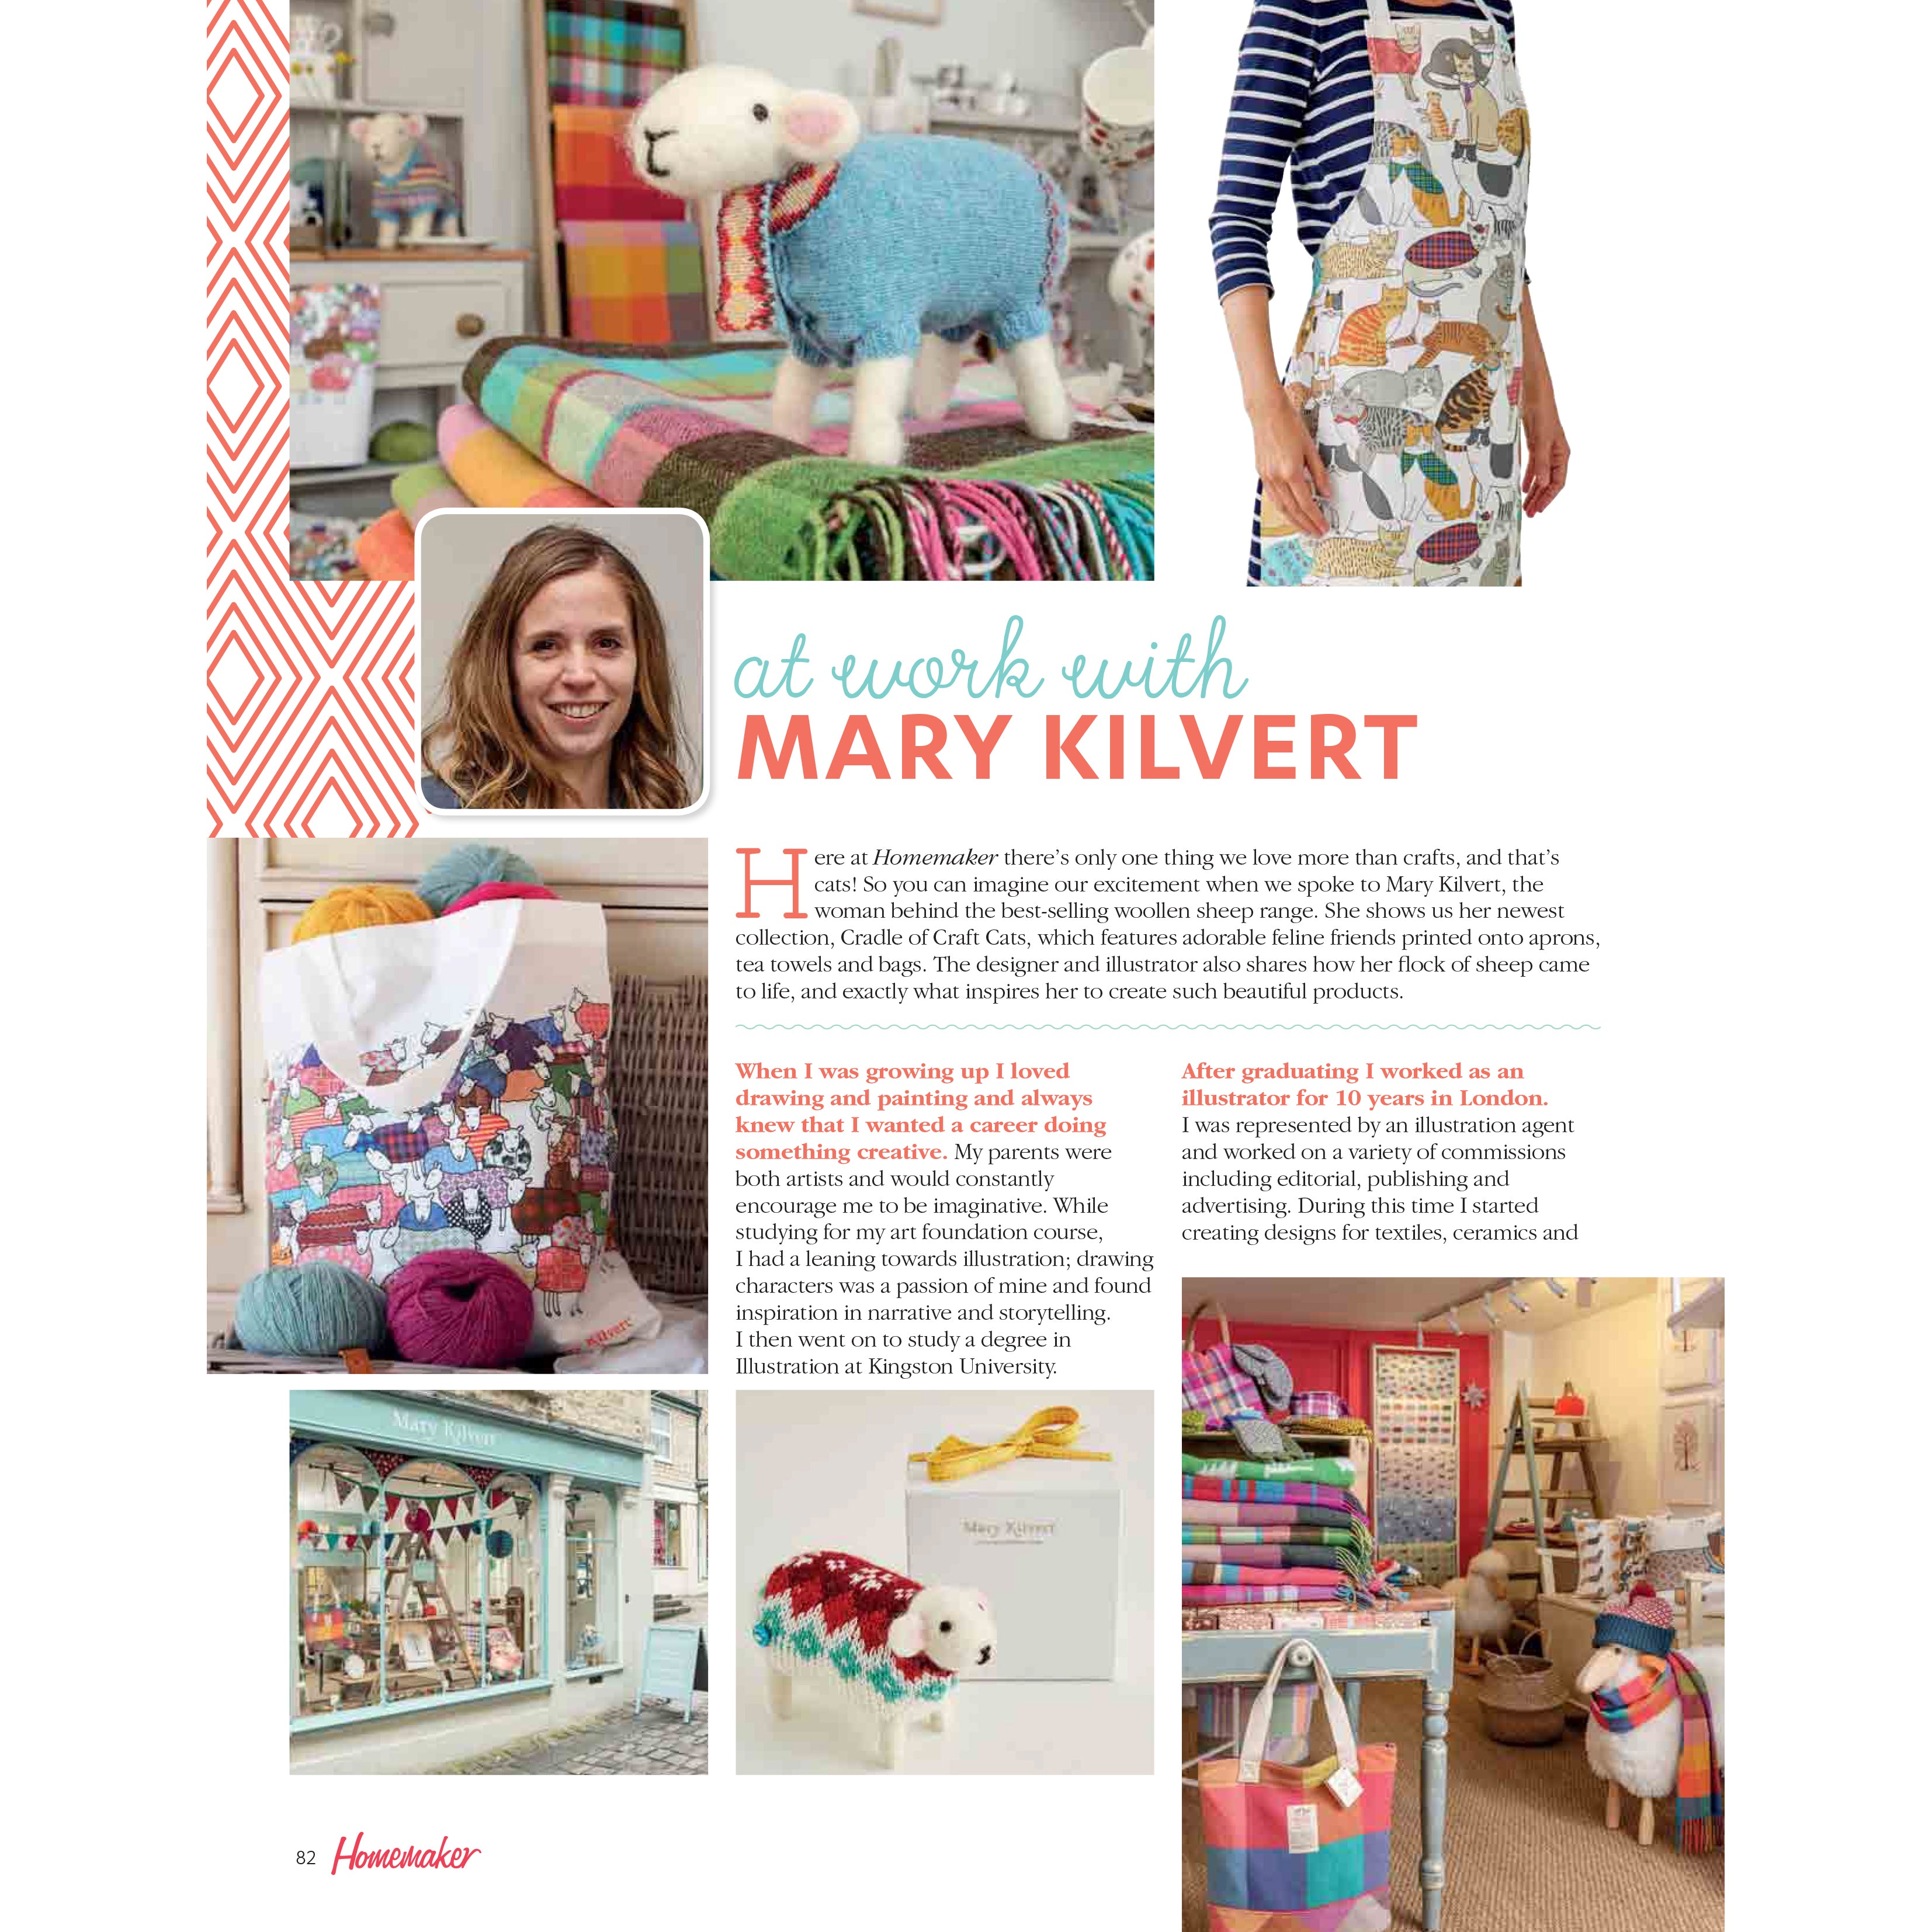 'At Work with Mary Kilvert' article in Homemaker magazine